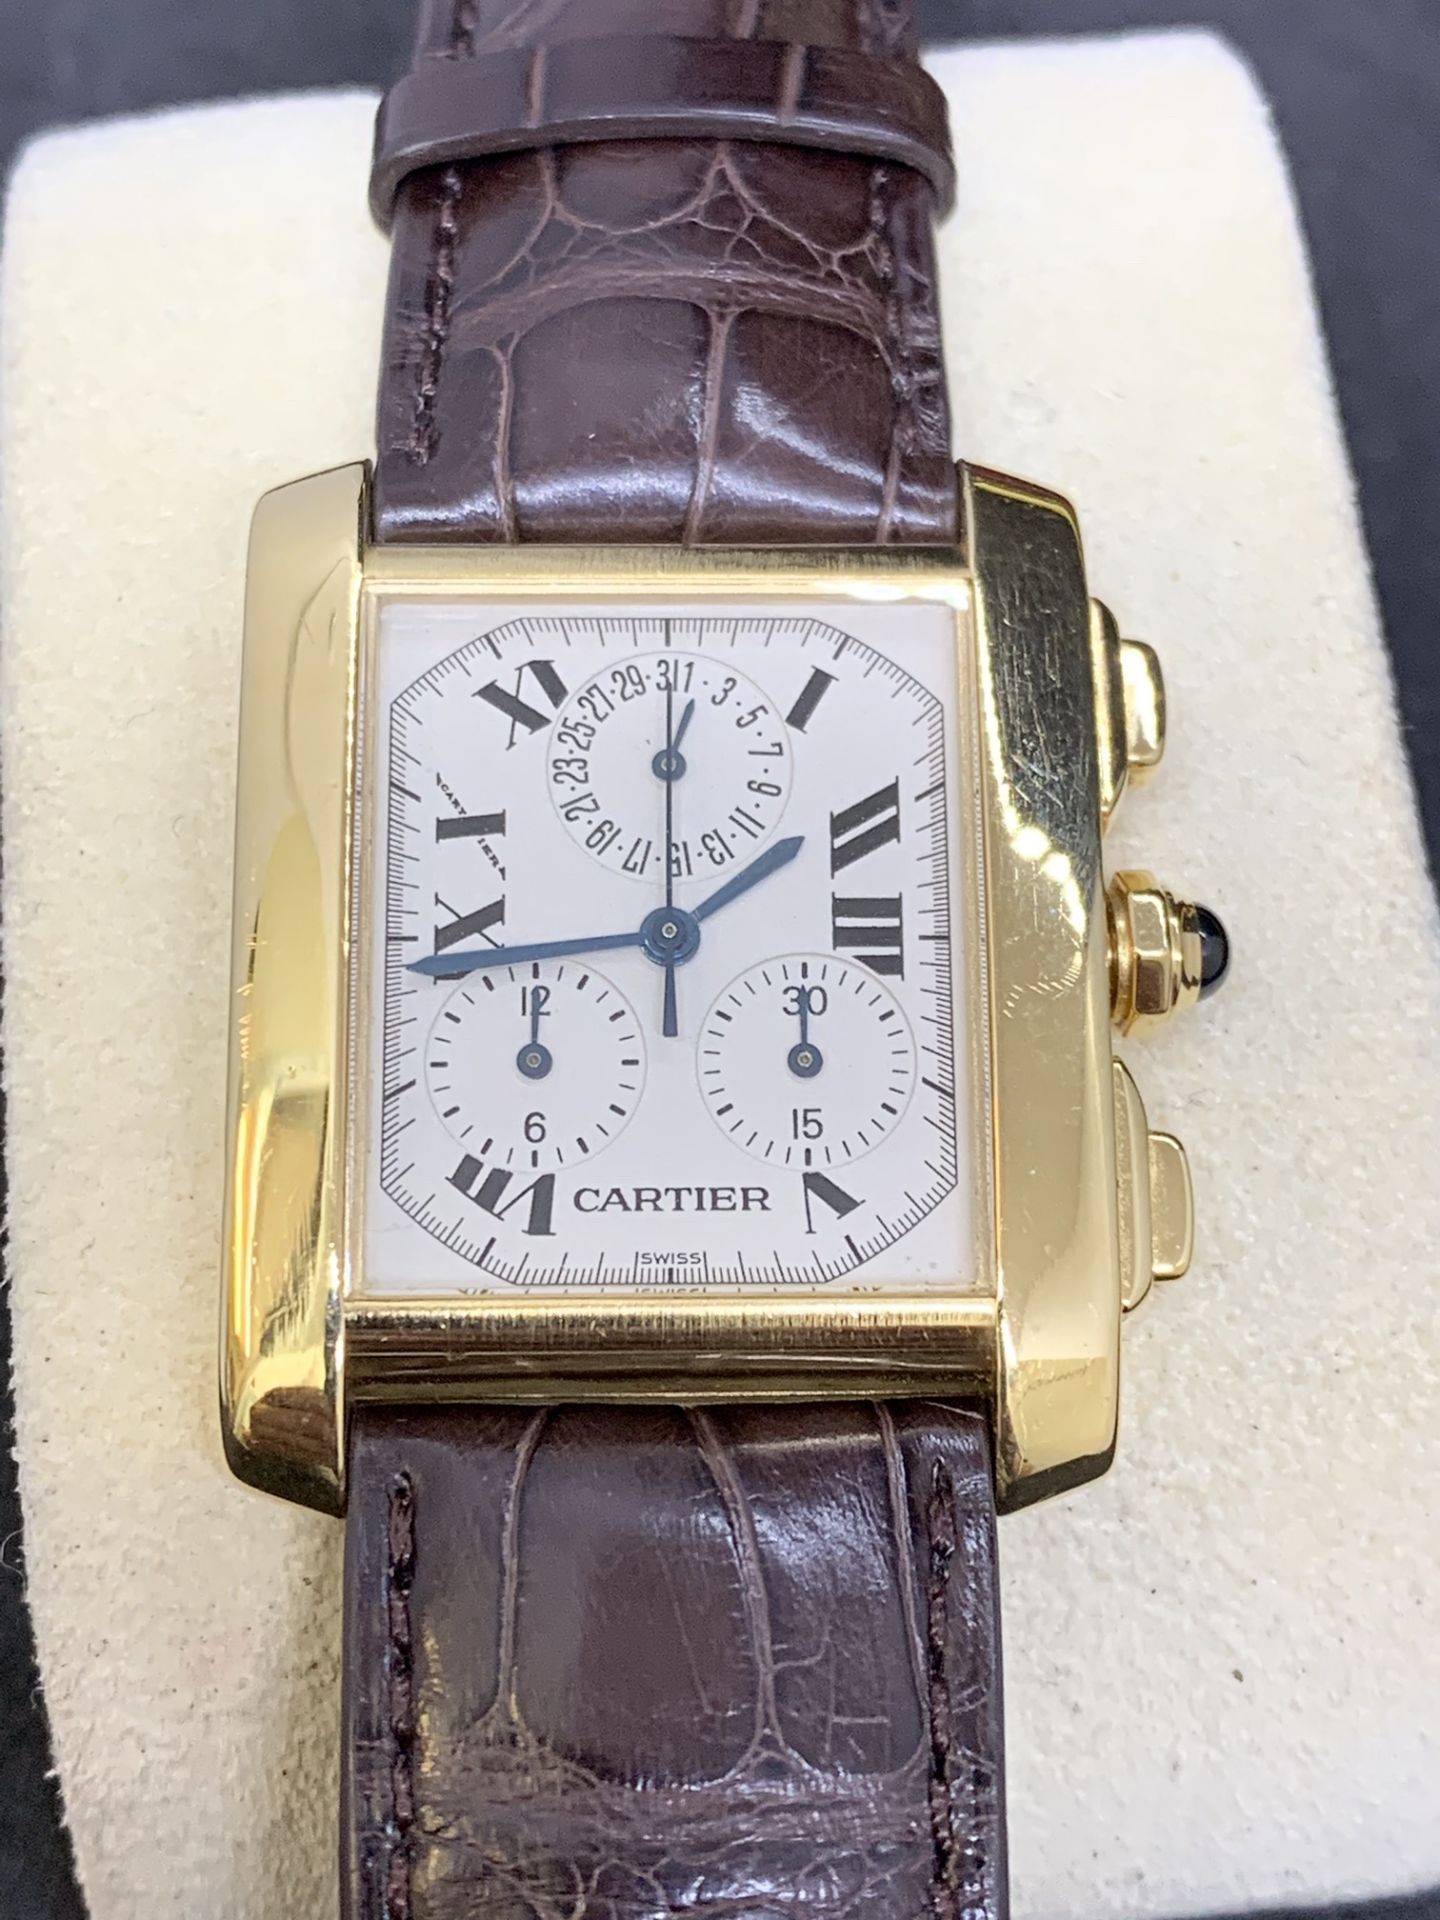 CARTIER 18ct GOLD CHRONOGRAPH WATCH - Image 11 of 11